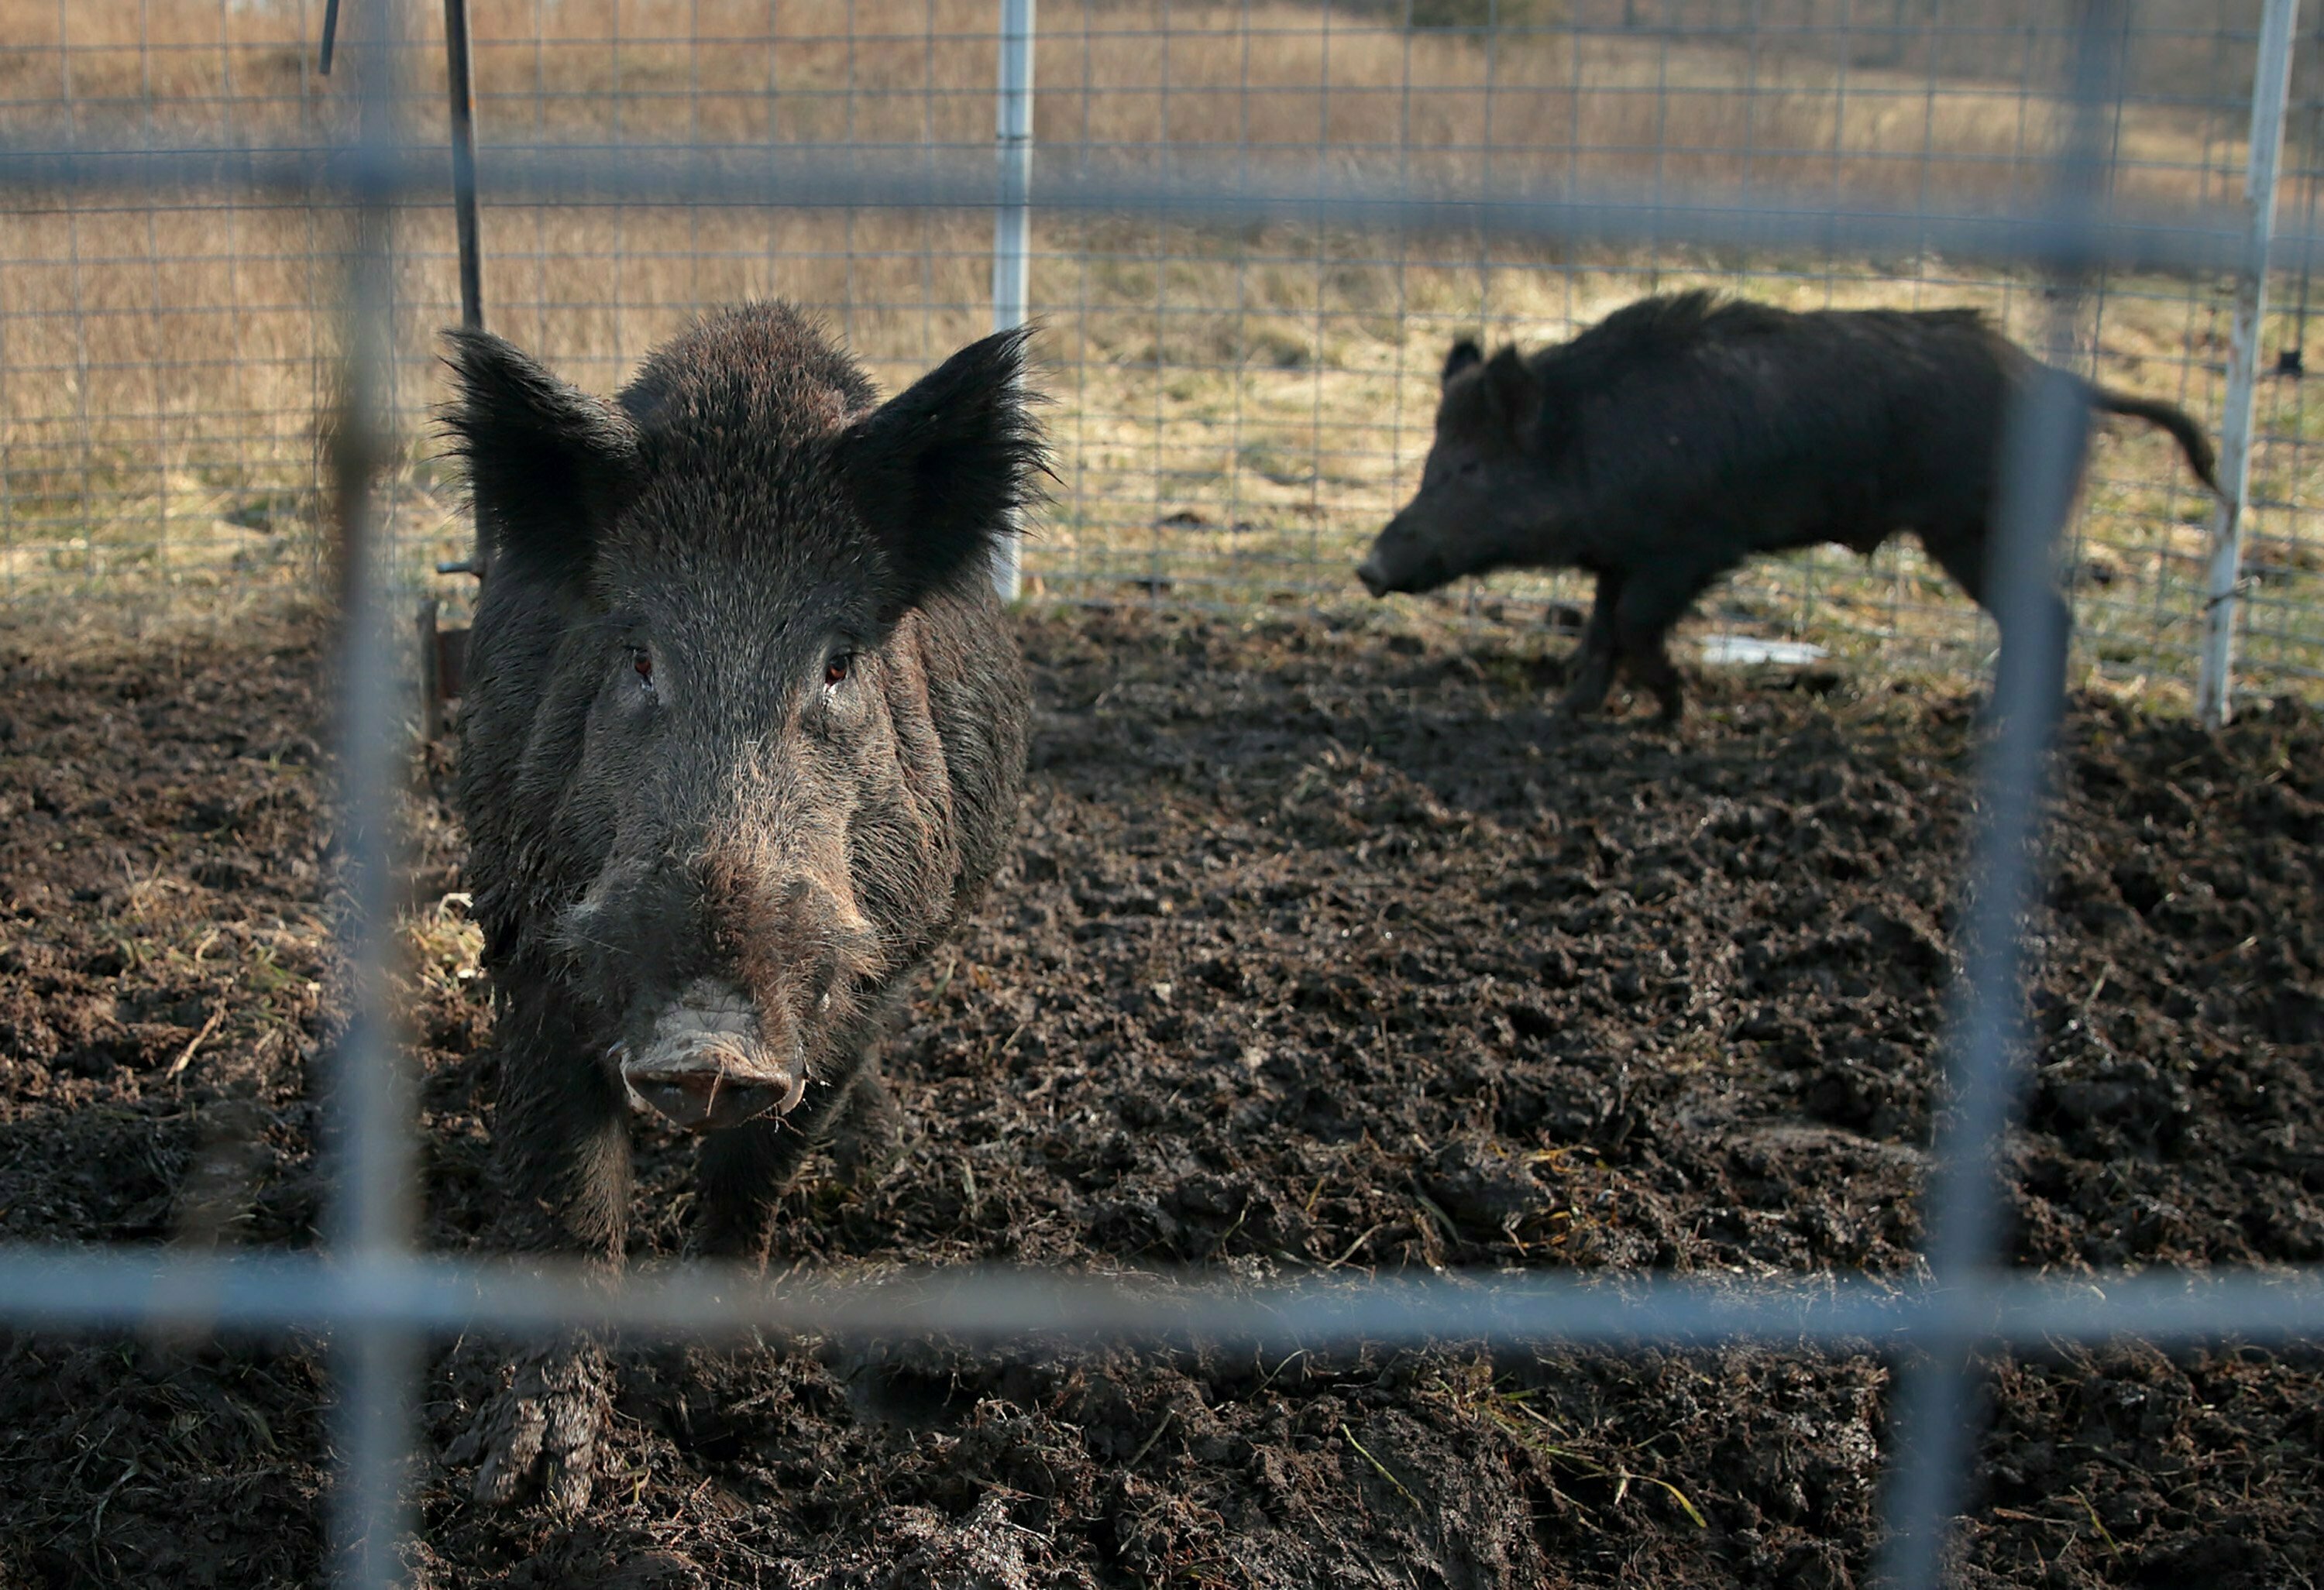 Feral pigs believed to be in the Shuswap area, experts warn